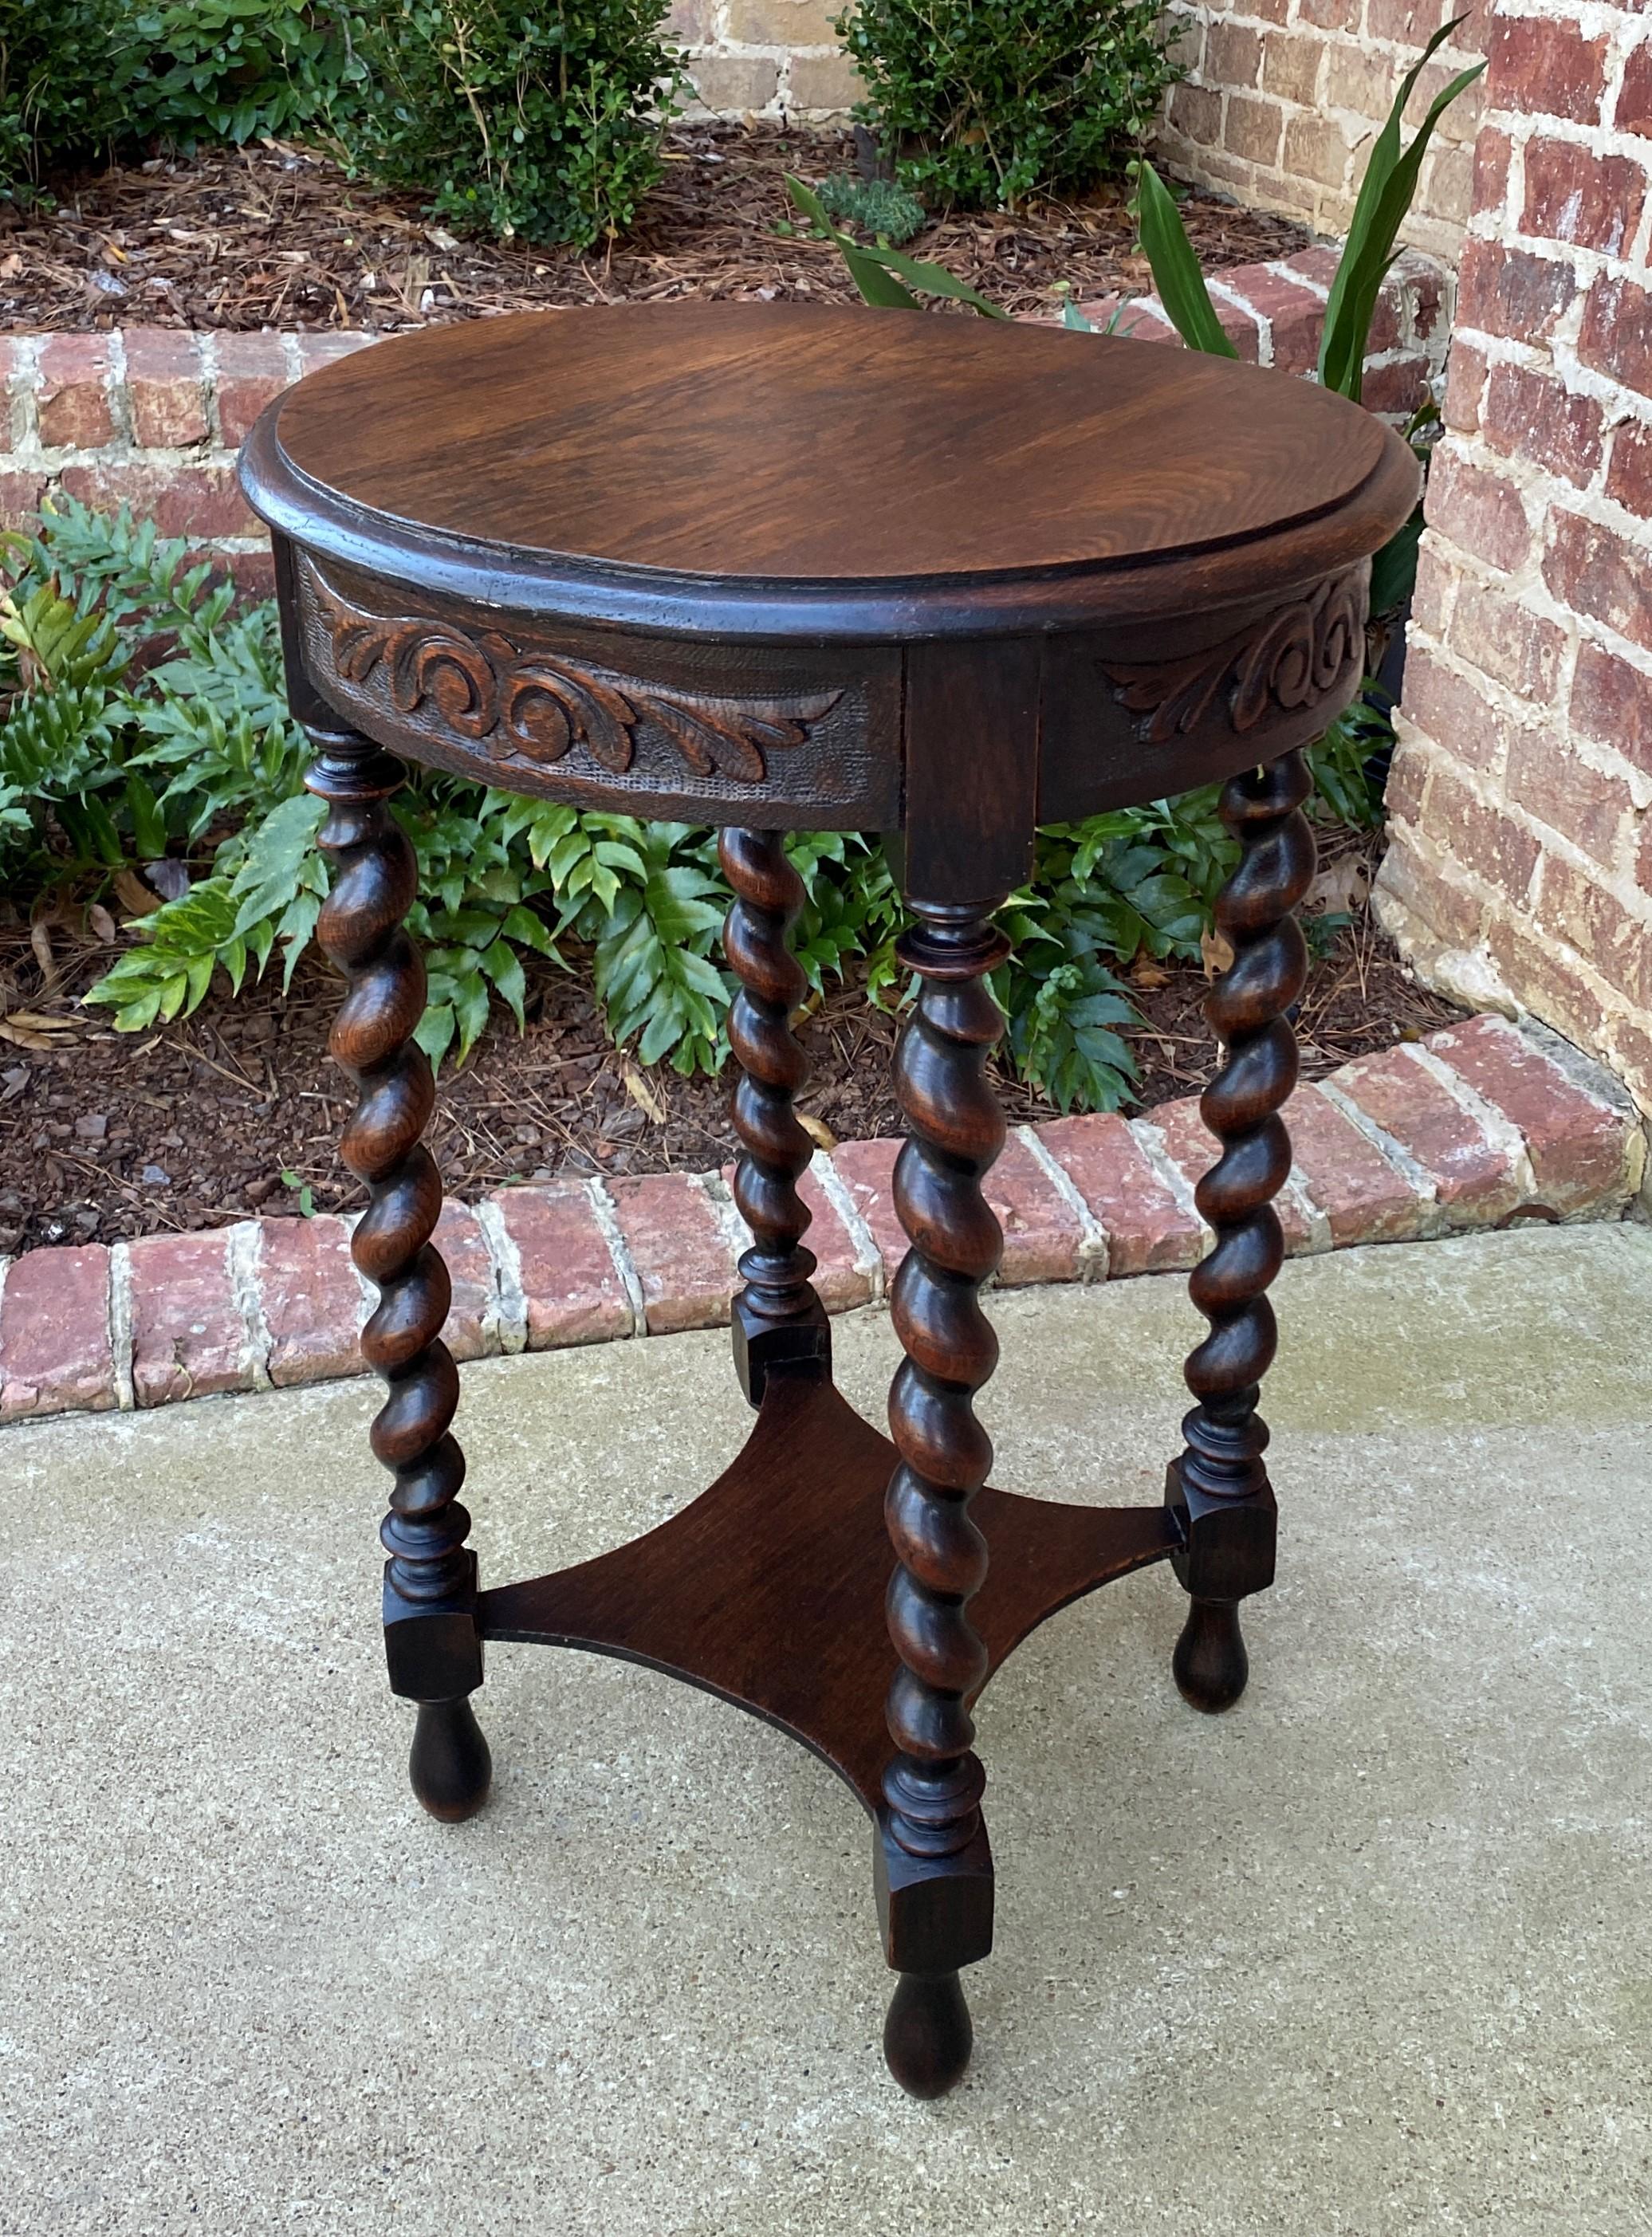 Antique English Round Table End Table Occasional Table Barley Twist Oak 2-Tier 4